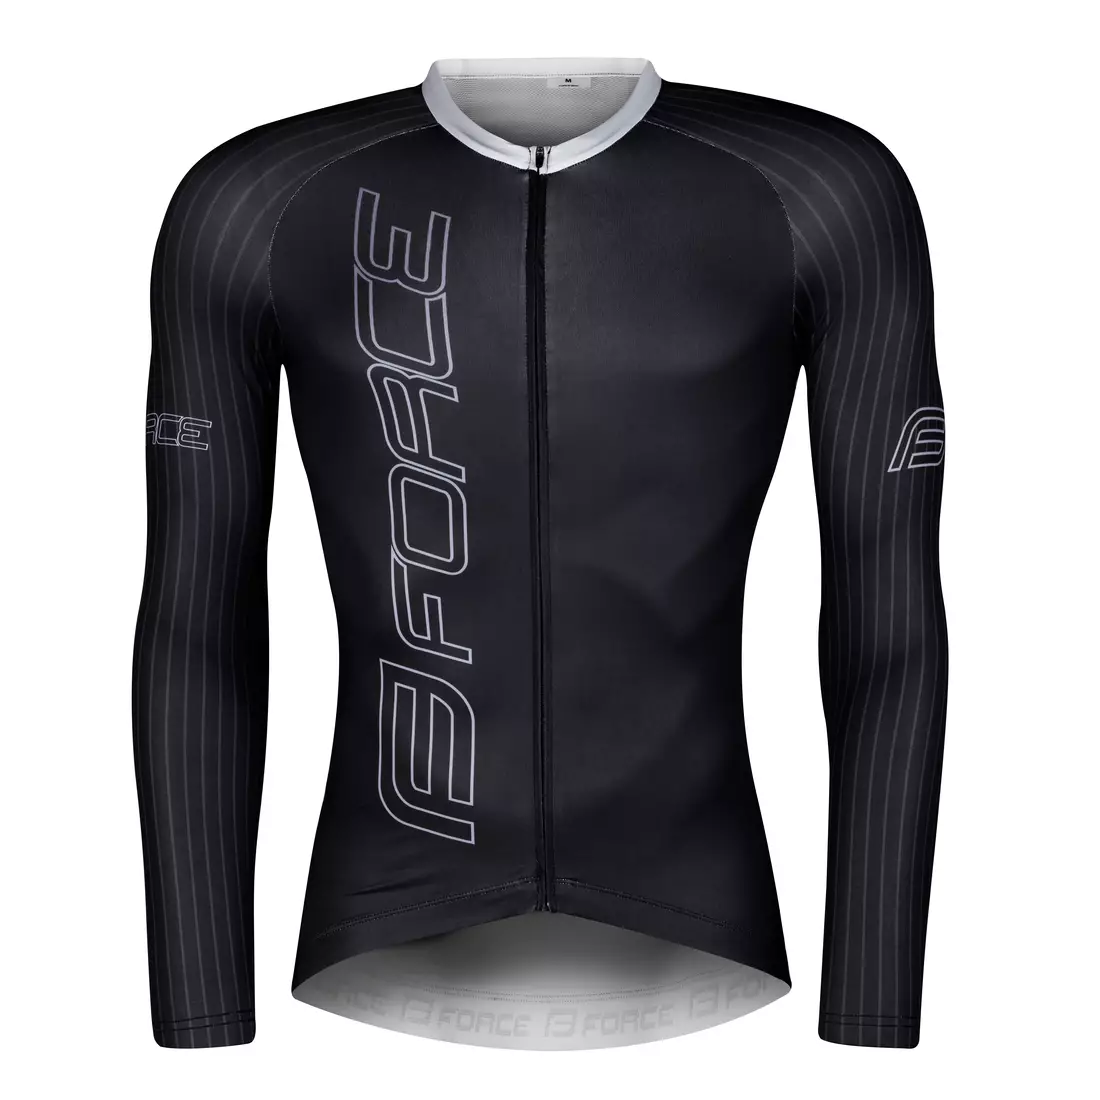 FORCE men's bicycle shirt with long sleeves TEAM PRO black/grey 9001439